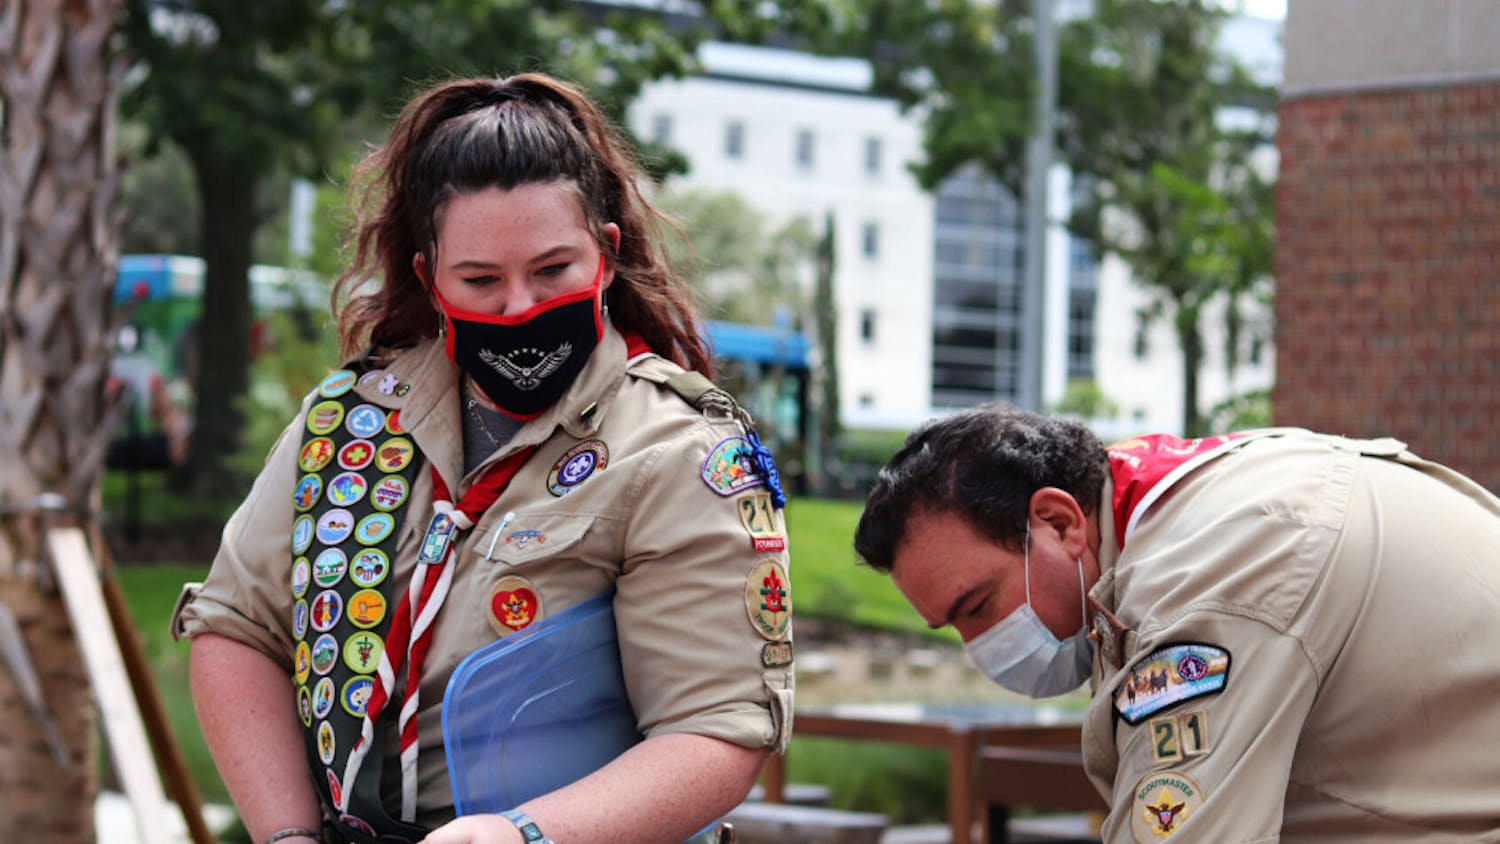 Olivia Foli, 16, an eagle scout who helped start Gainesville’s first female troop, and her dad, Randy Foli, take some of the 676 painted healing stones out of its containers at the UF Health Children's Healing Garden on Friday, Sept. 18, 2020.